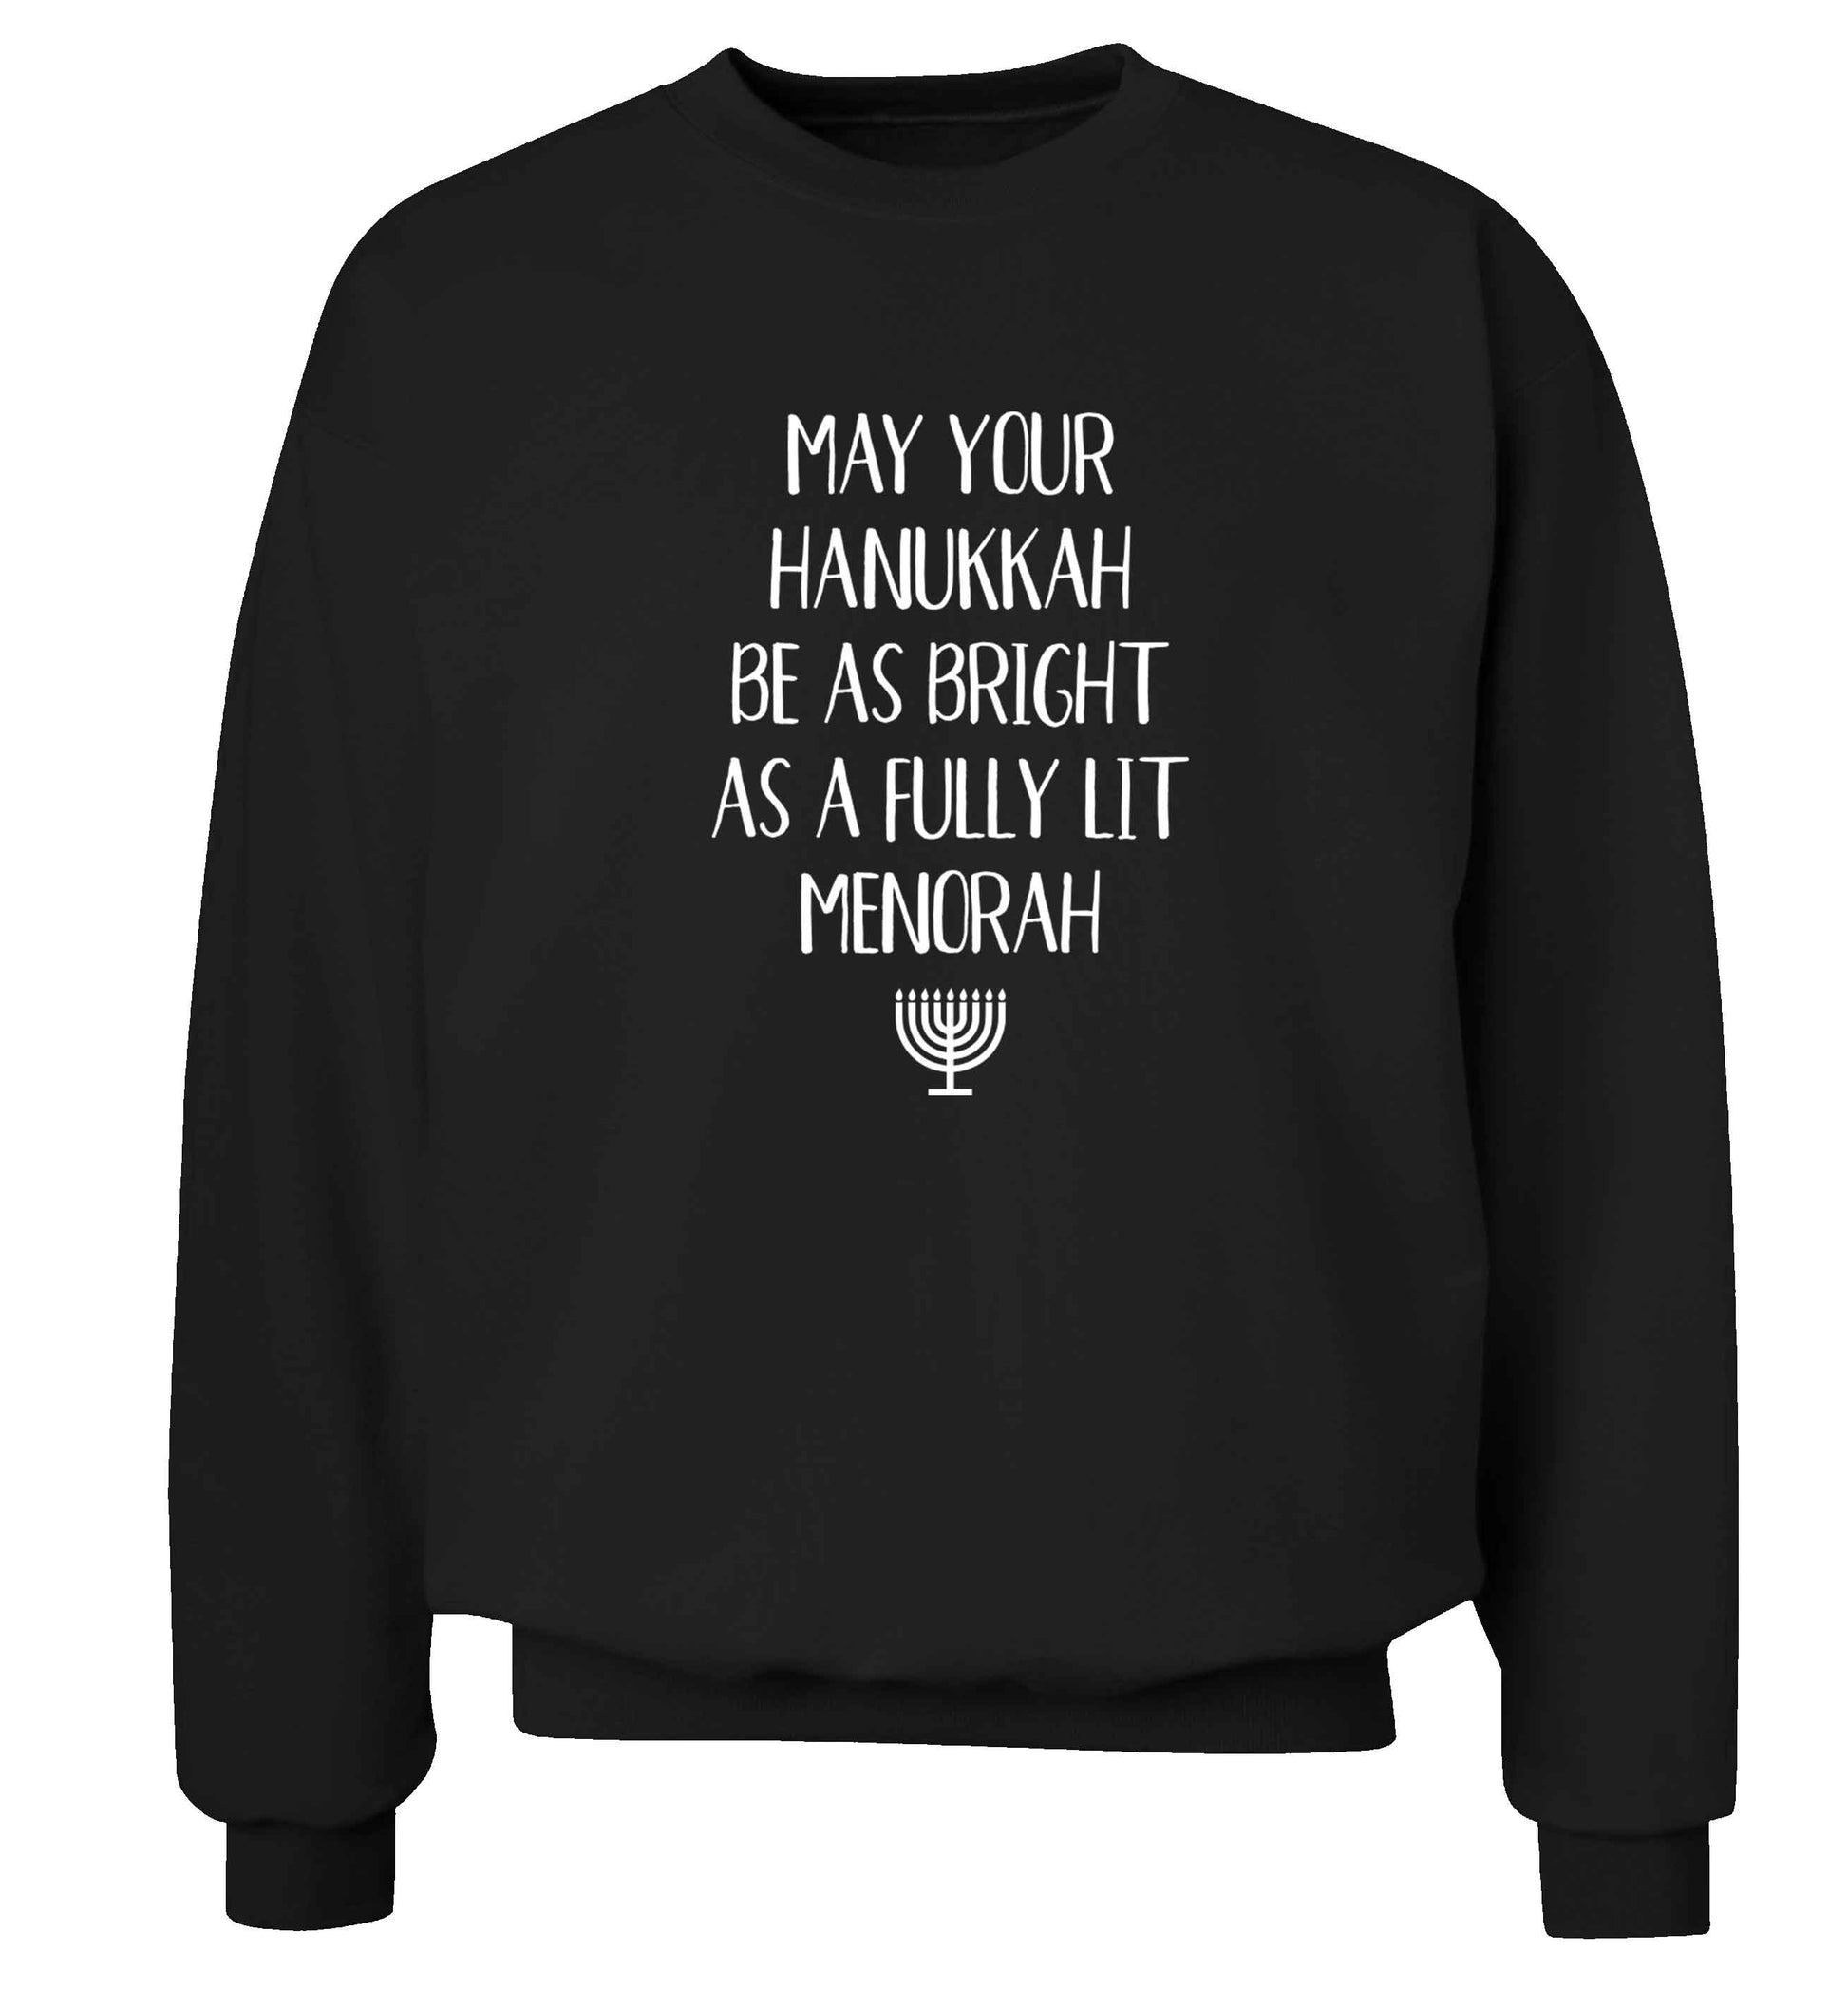 May your hanukkah be as bright as a fully lit menorah Adult's unisex black Sweater 2XL